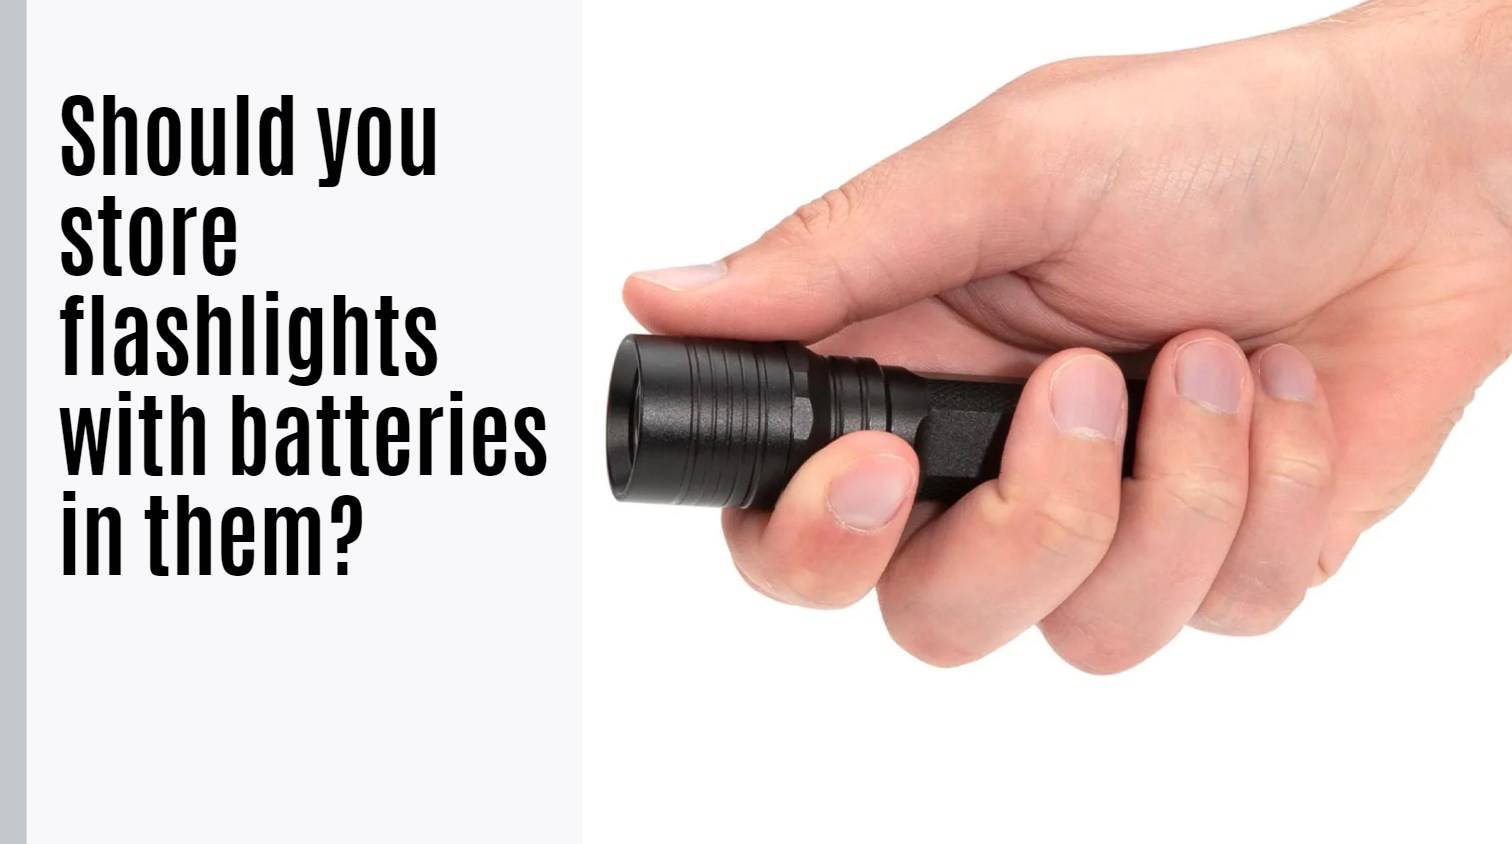 Should you store flashlights with batteries in them?